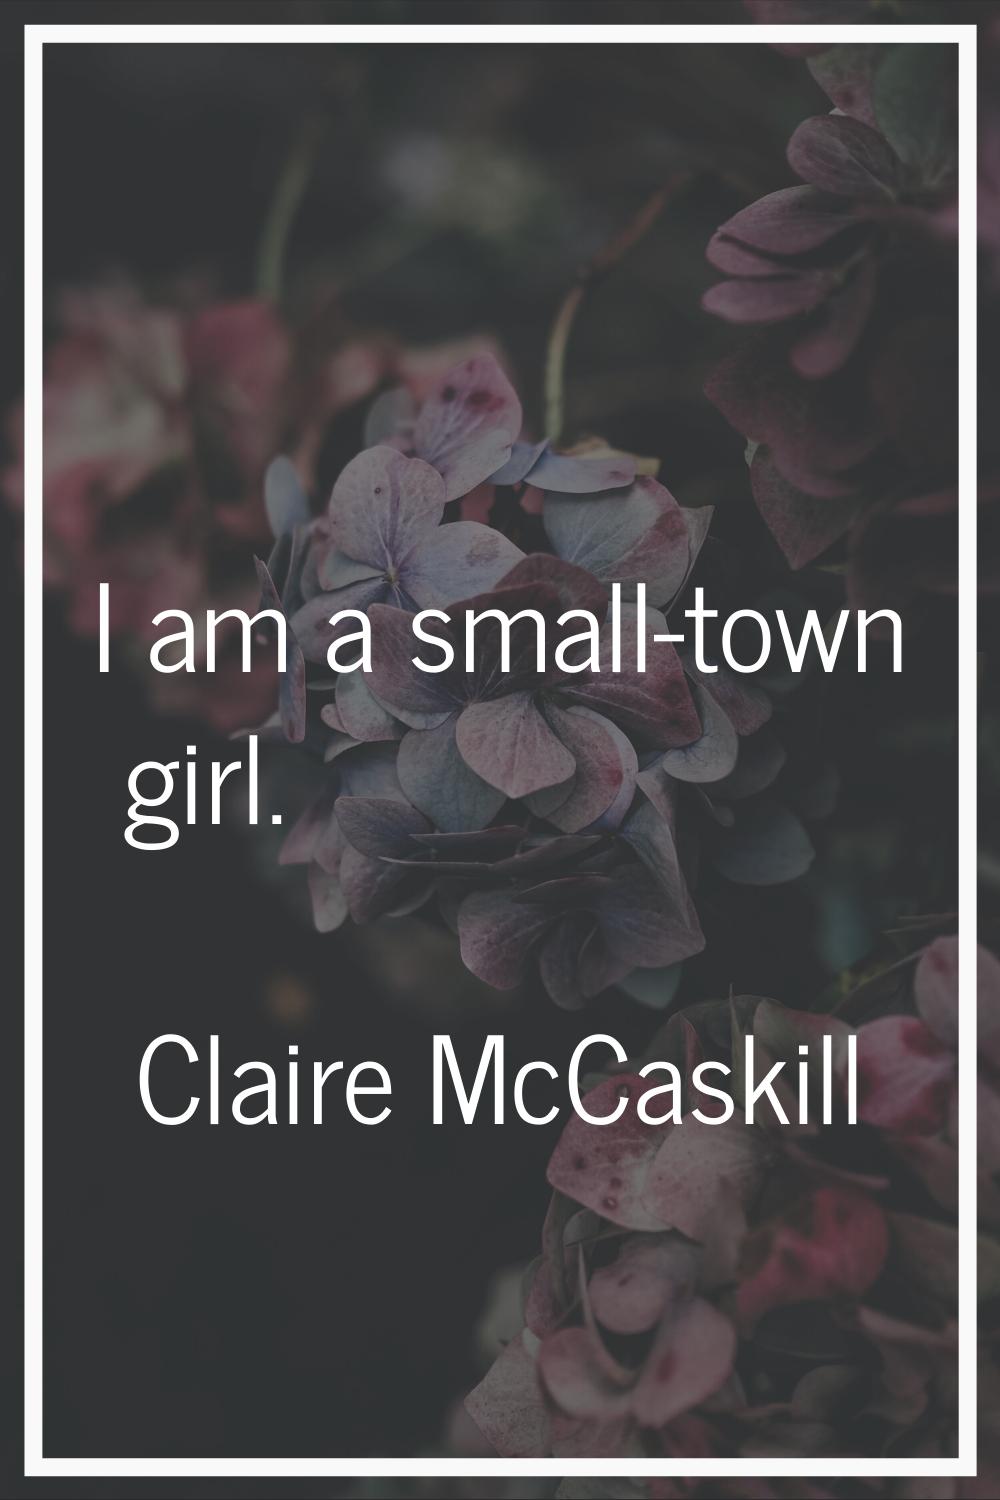 I am a small-town girl.